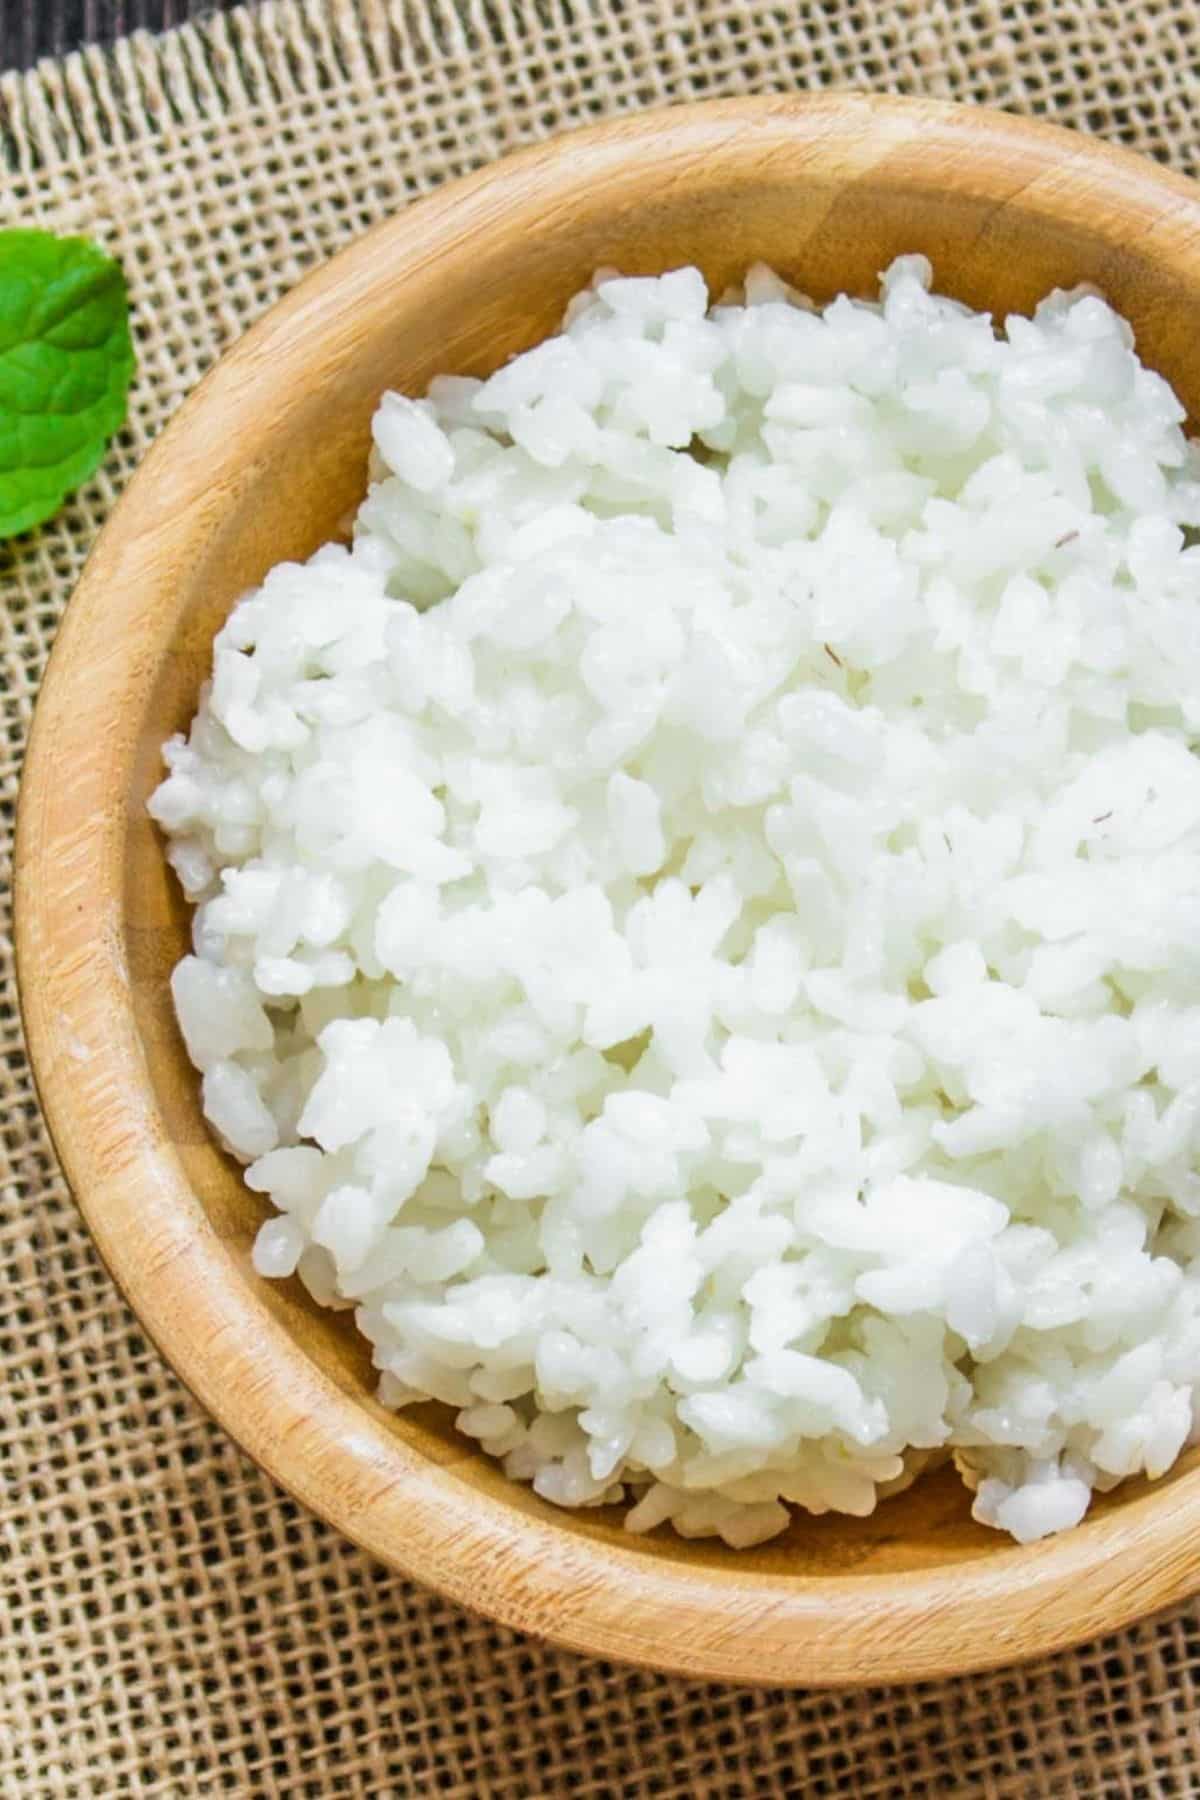 White rice in wooden bowl. In some dishes, white rice can be a good substitute for orzo.